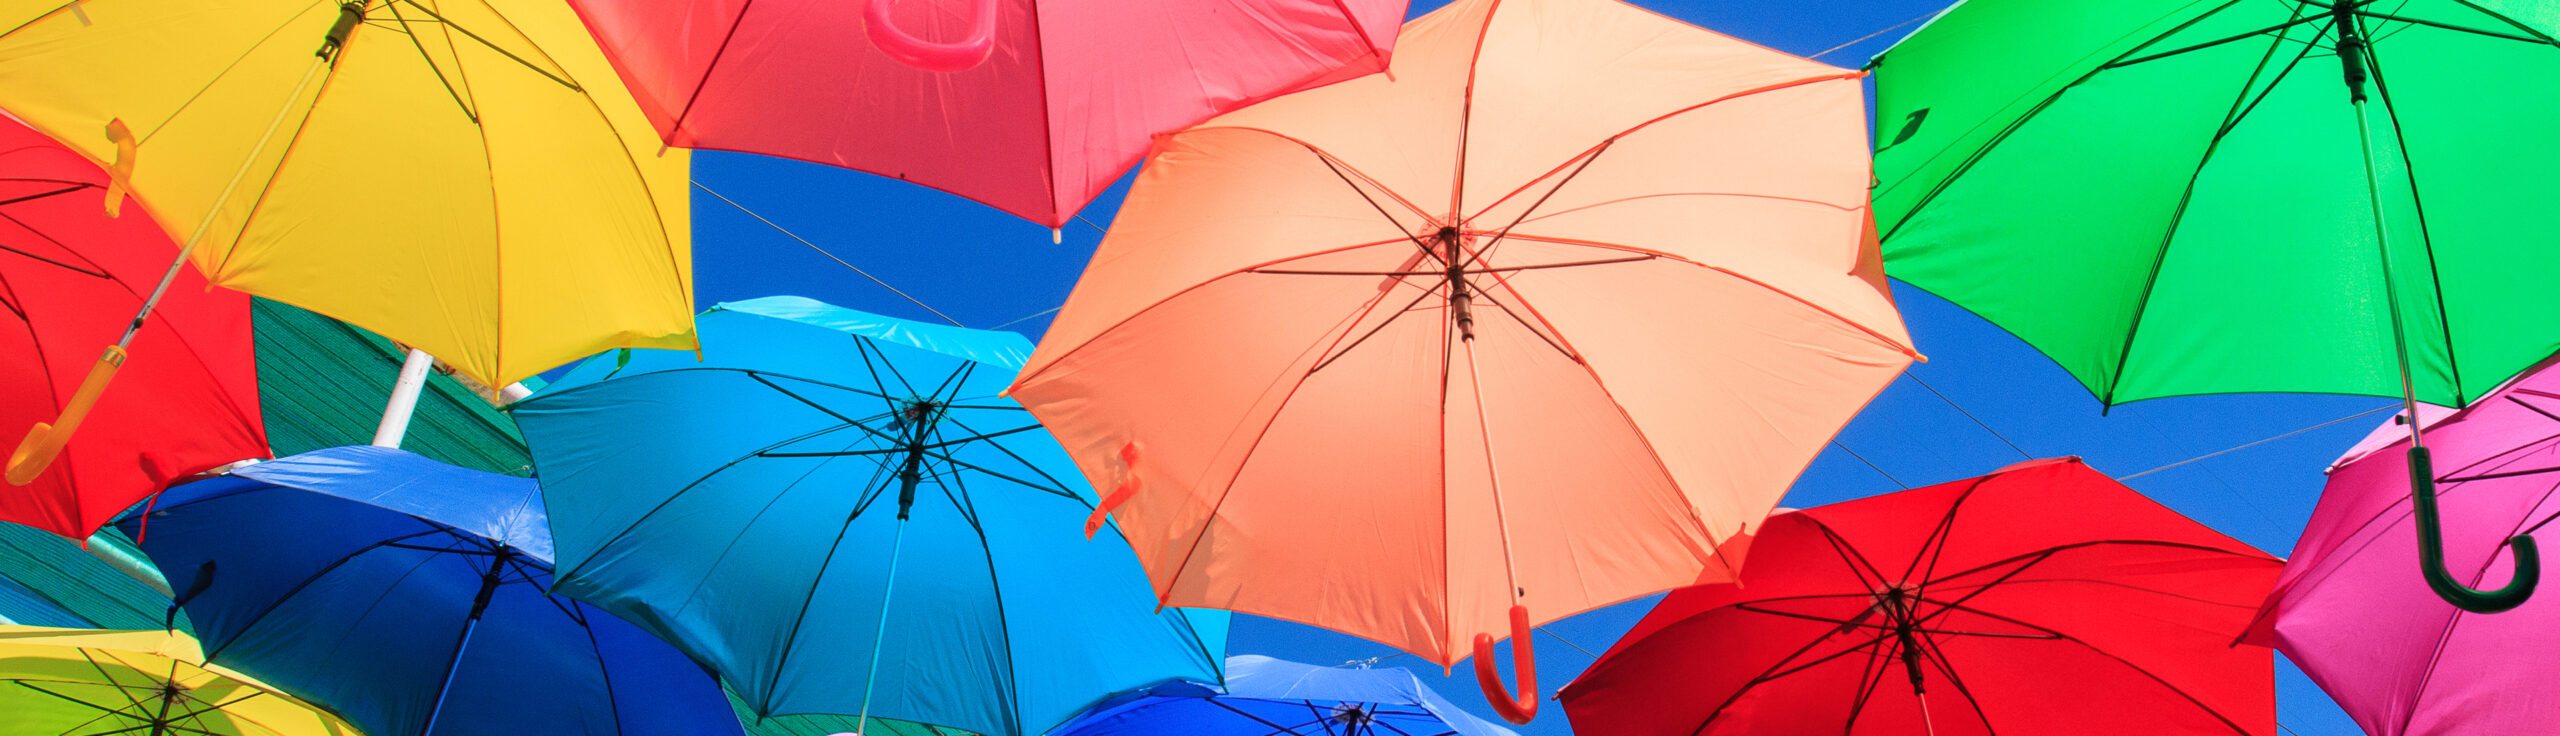 PICA Marketing Group homepage slider. Image of different colored umbrellas against blue sky.